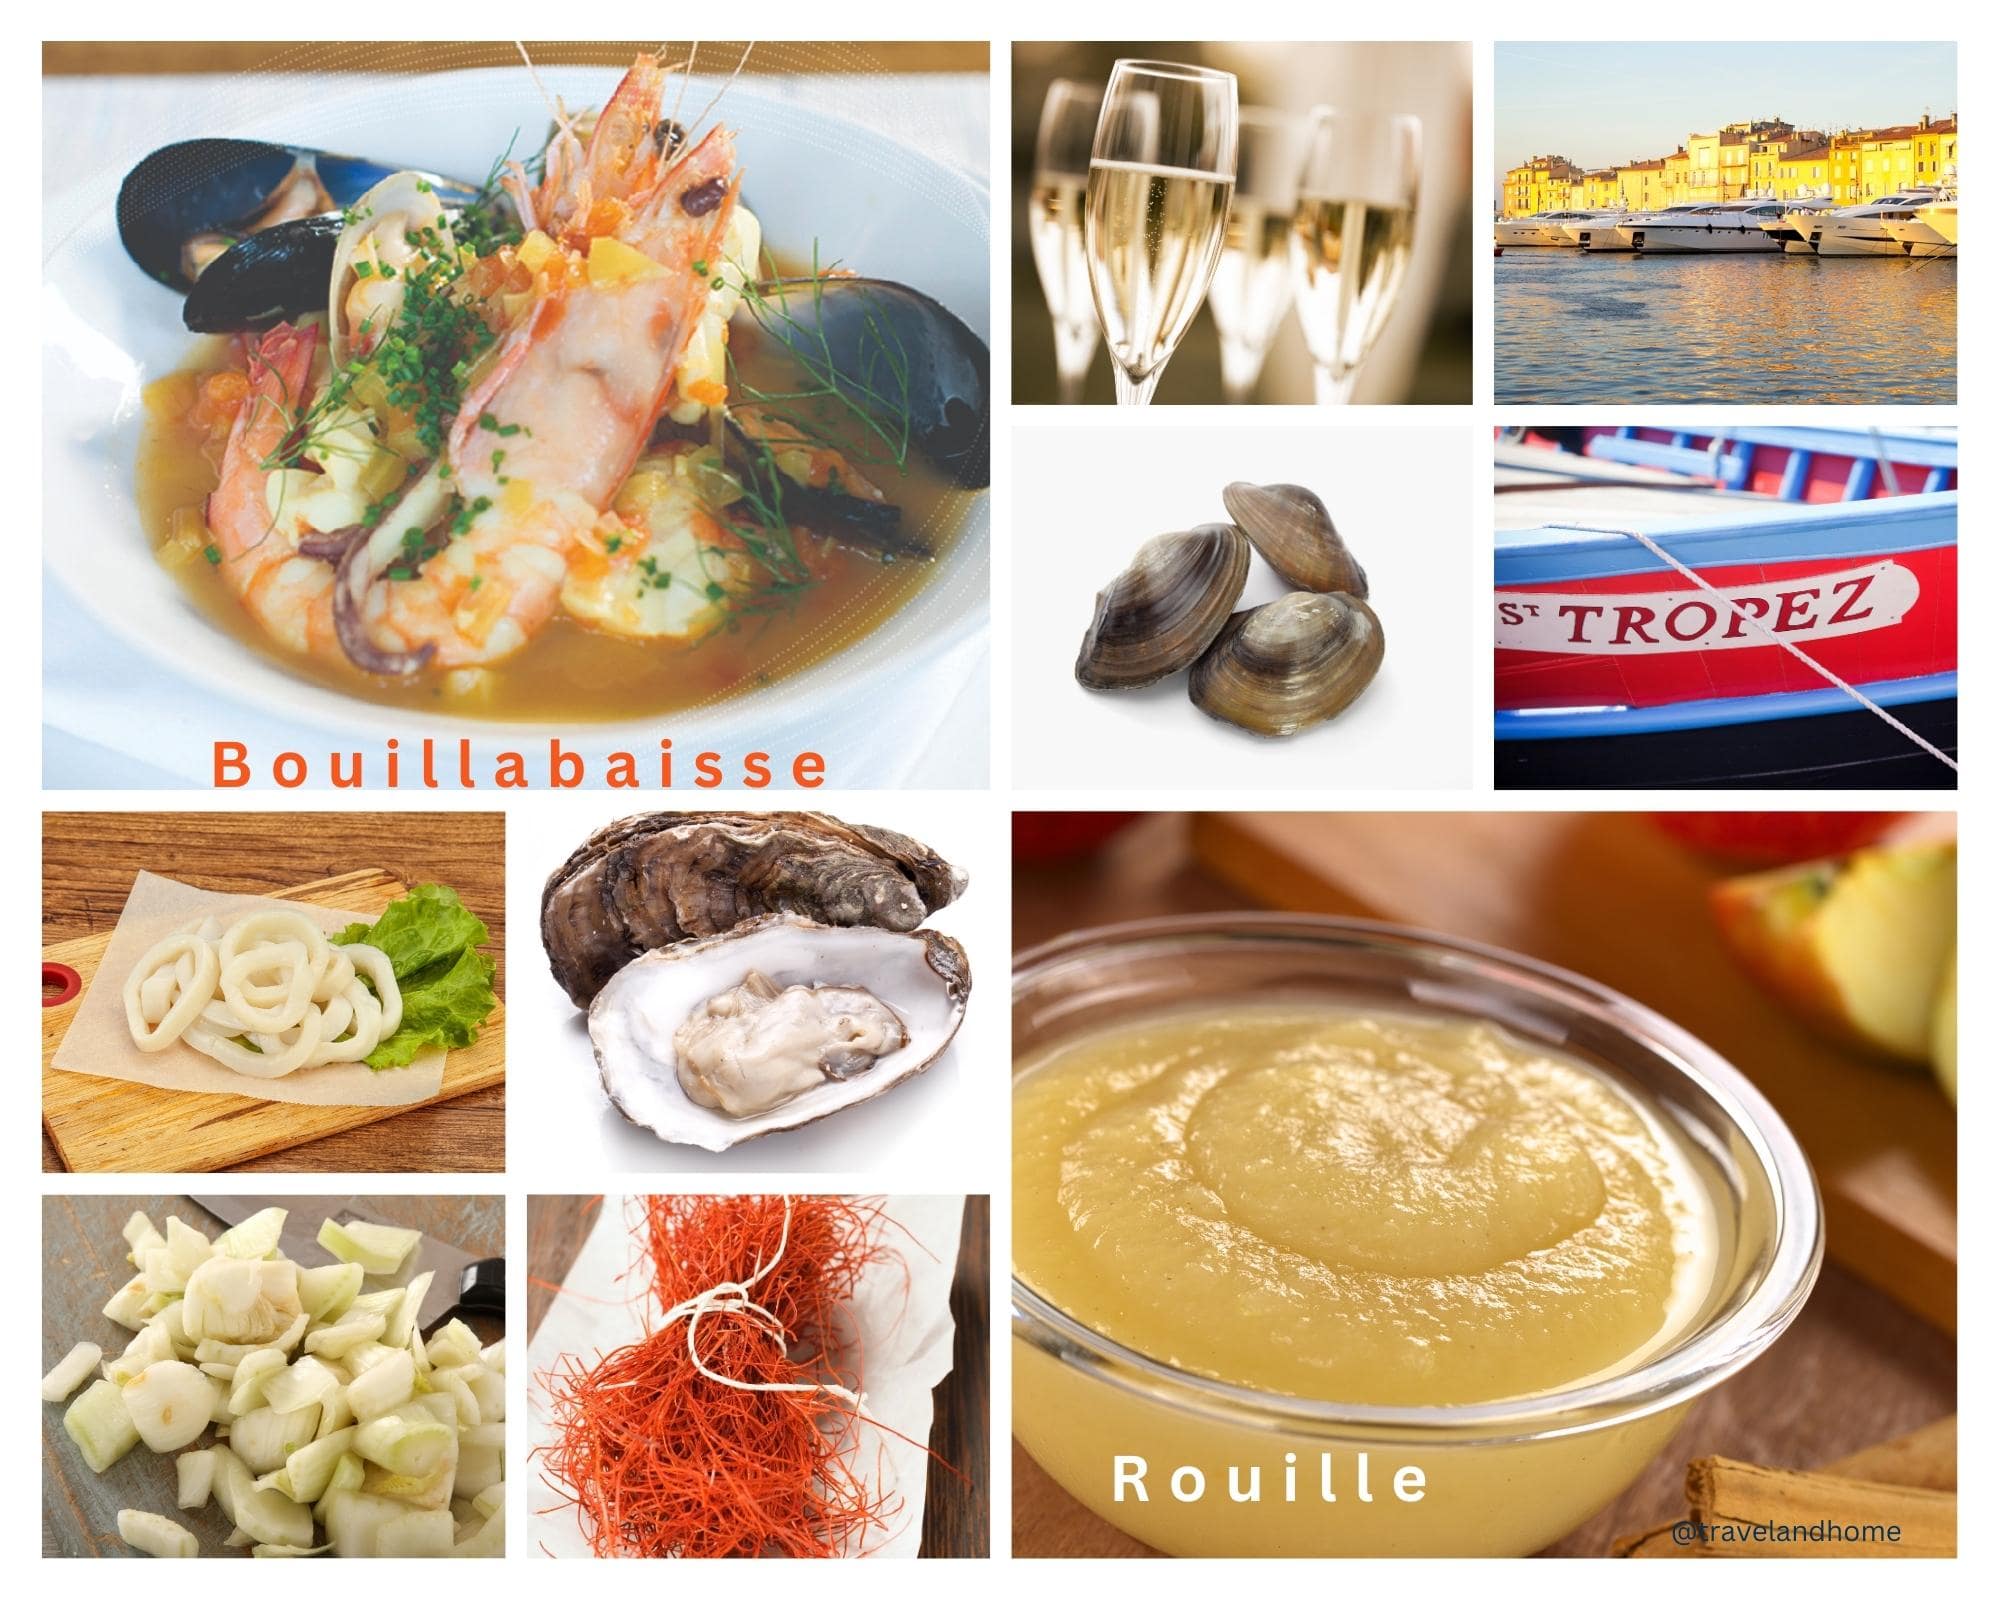 Boulliaibaisse quick and easy recipe French seafood soup what to eat in st tropez French cuisine travel and home min